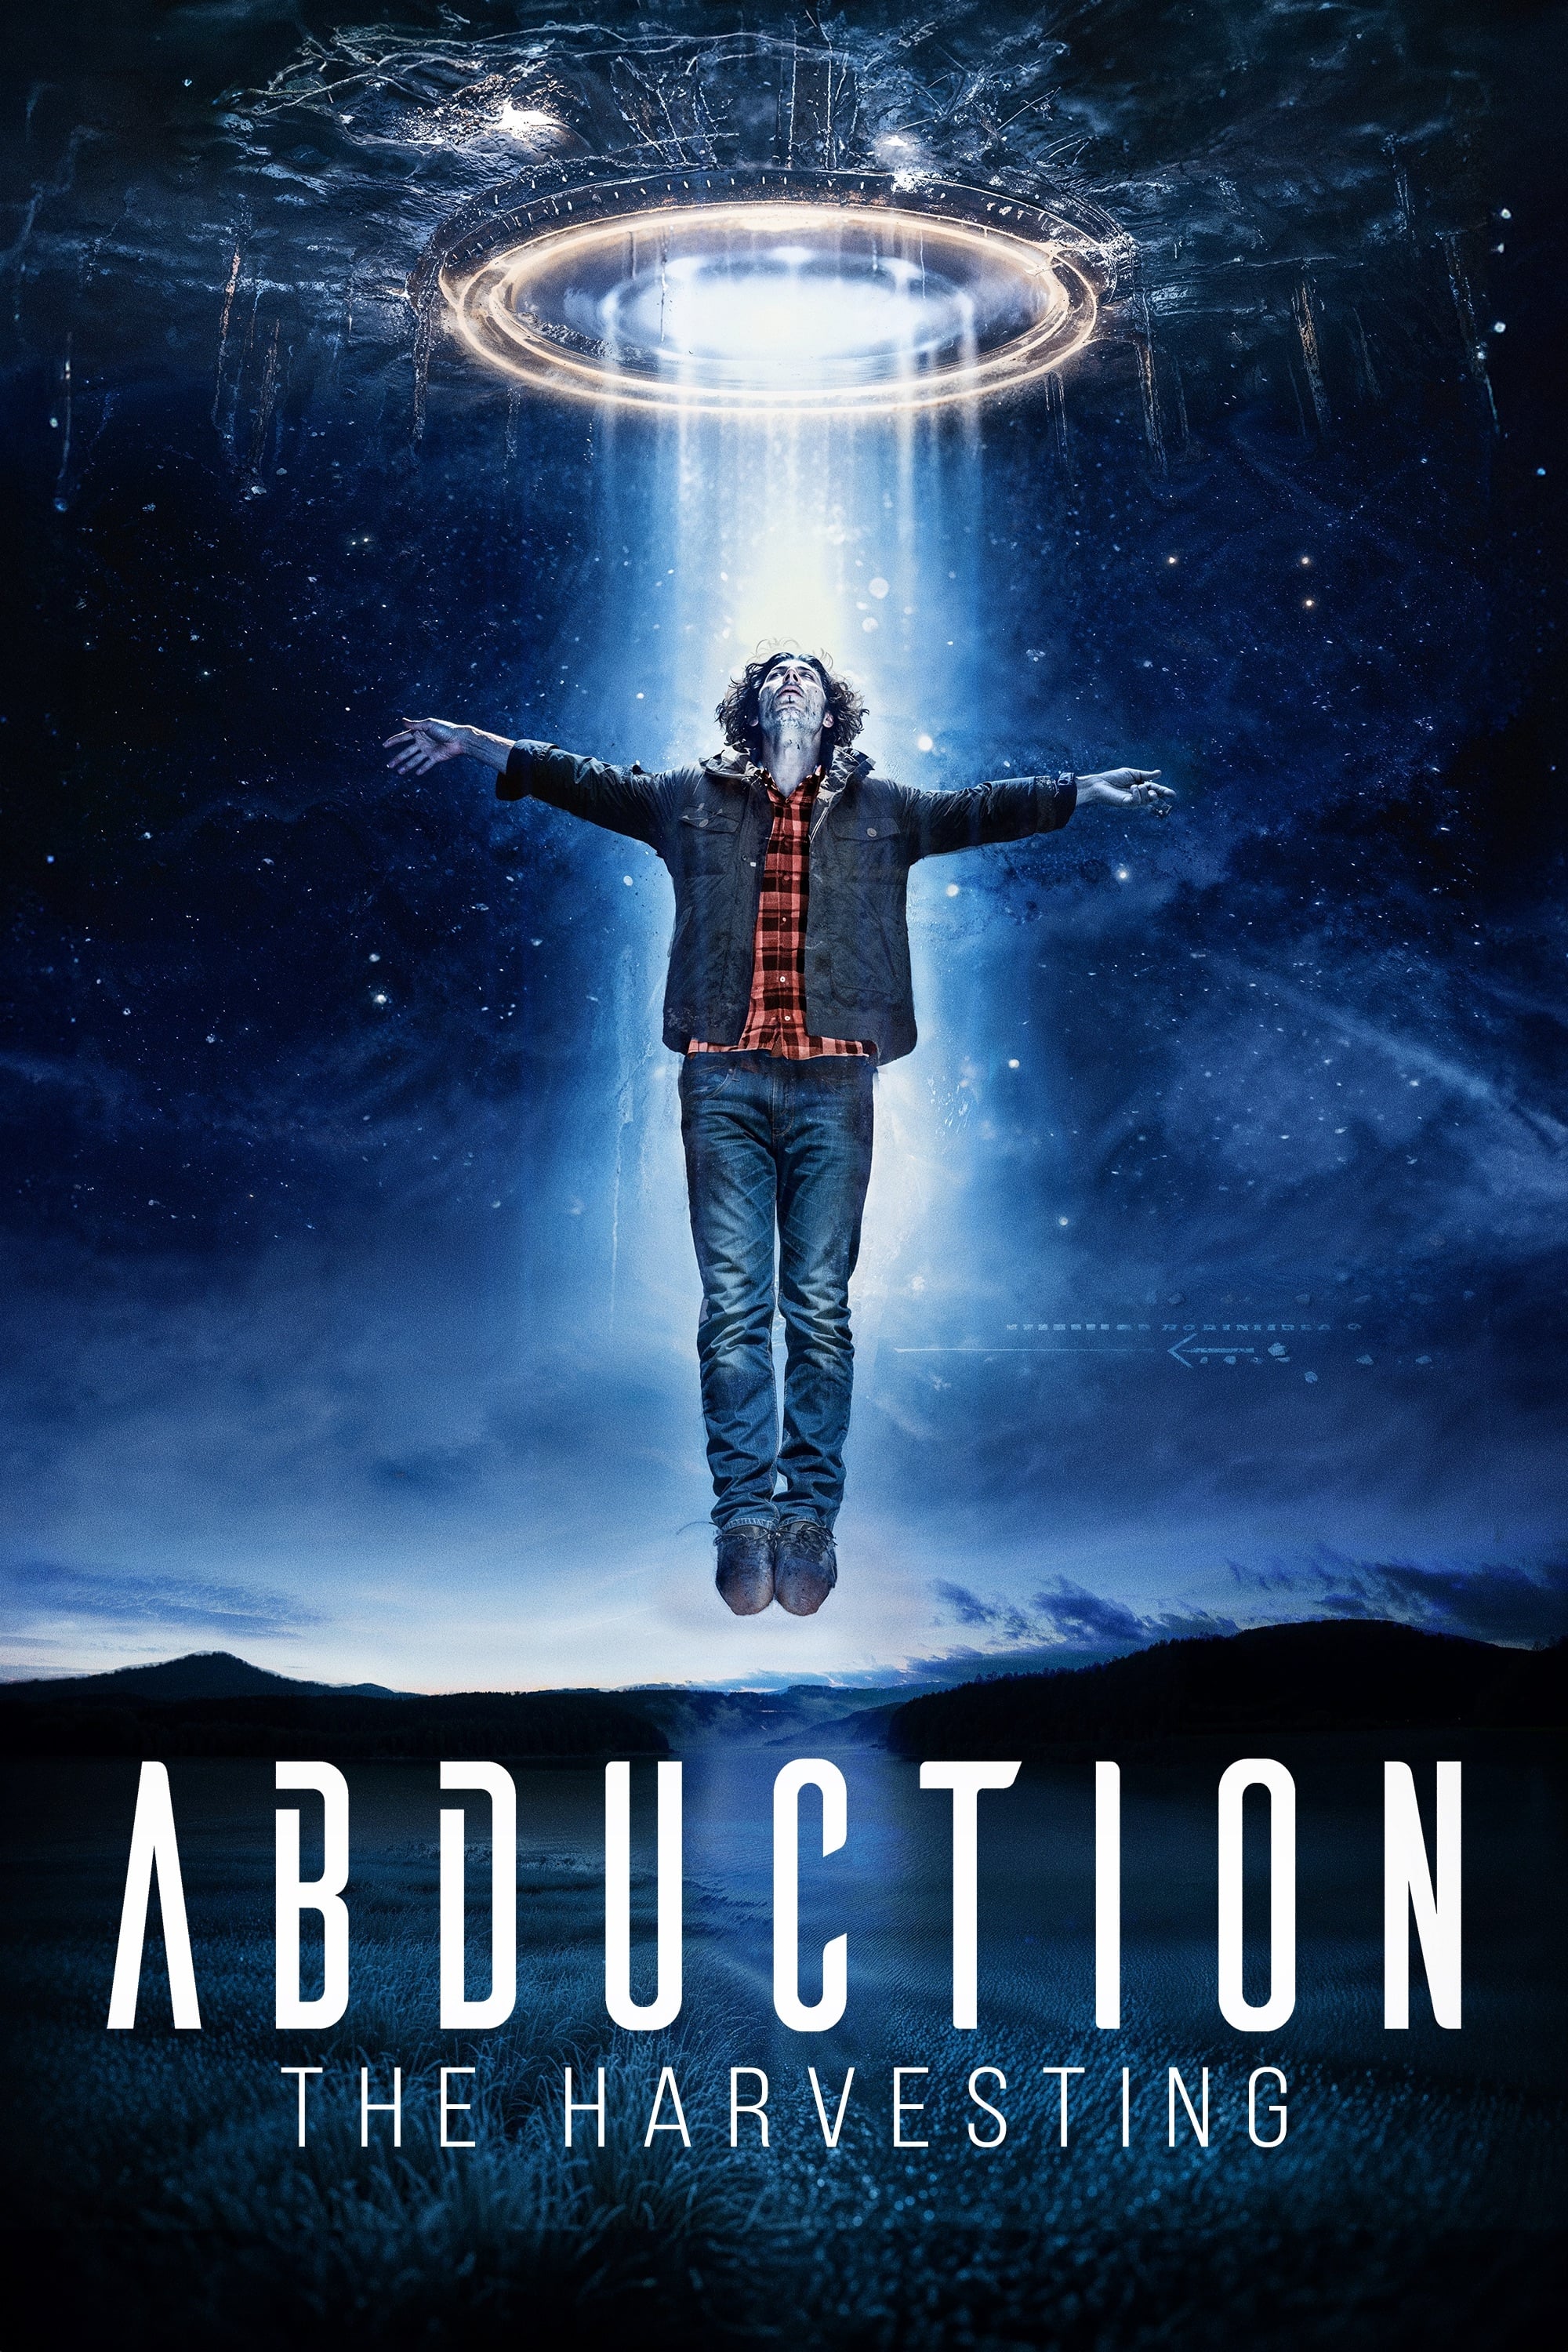 Abduction: The Harvesting